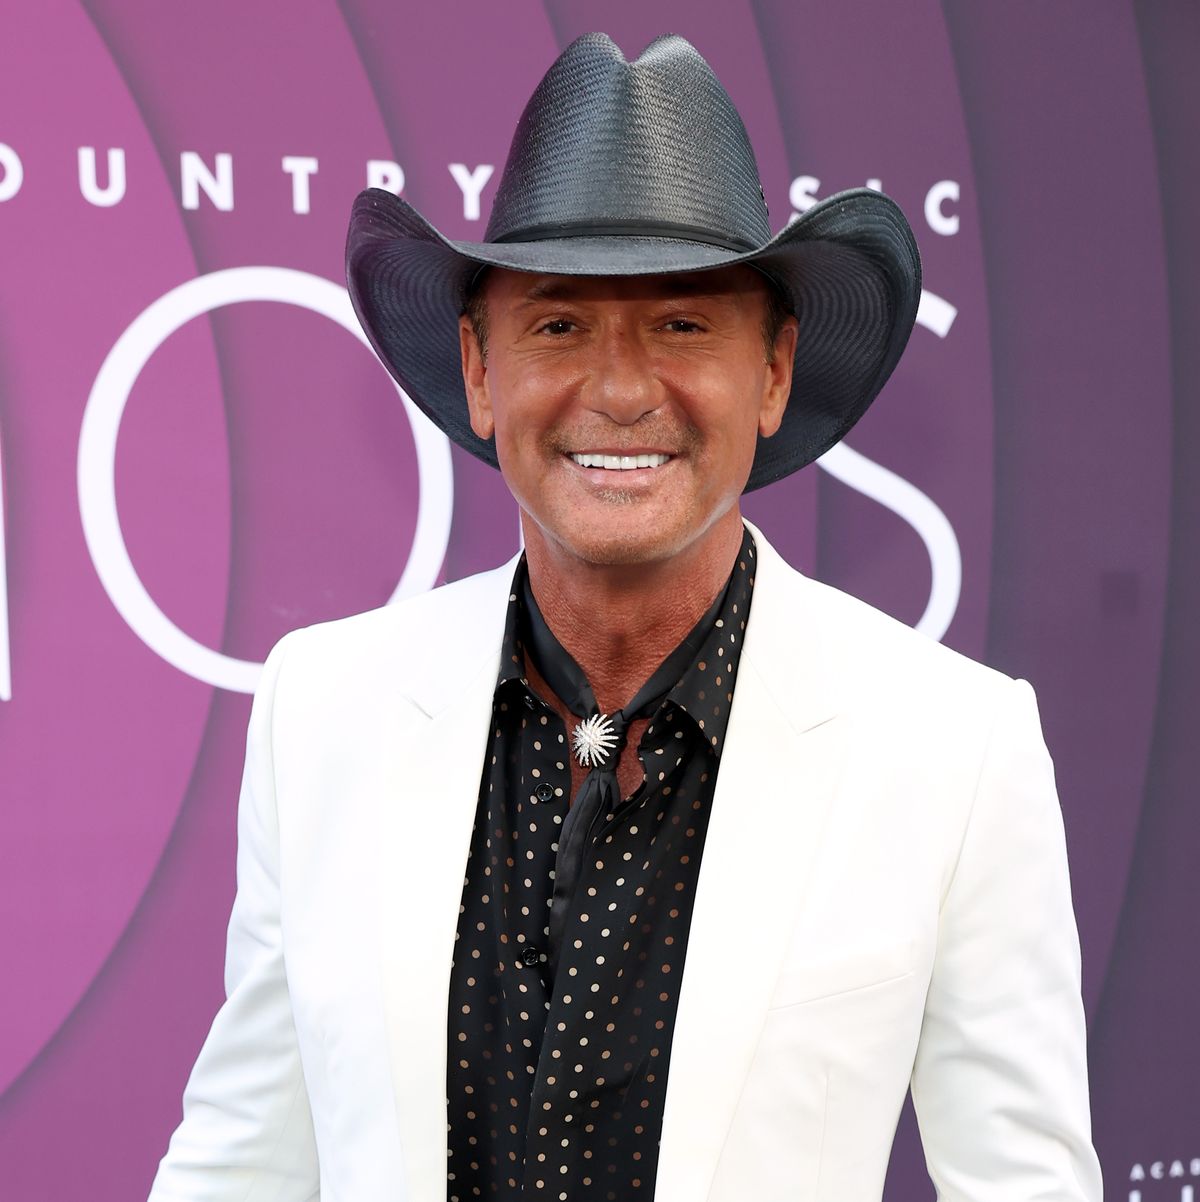 This Is How Faith Hill and Tim McGraw Spend Their Millions 